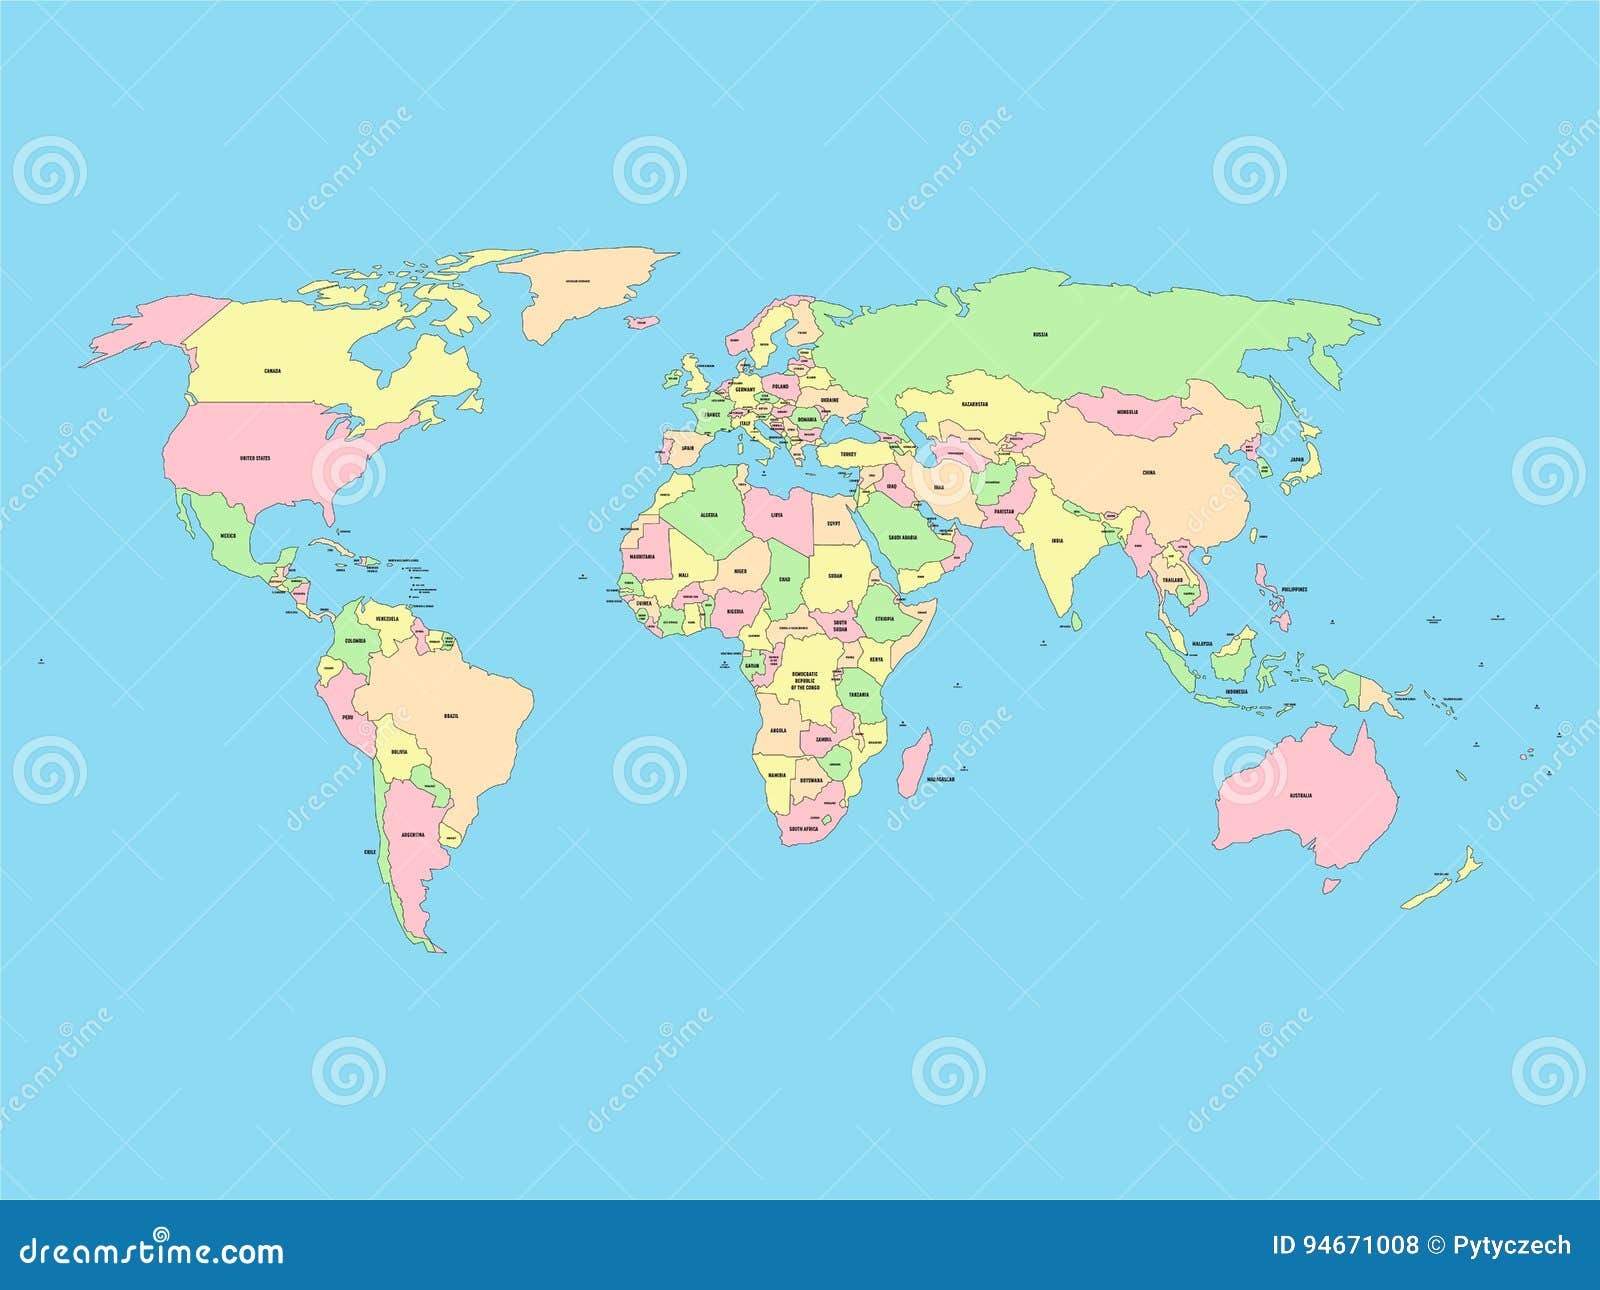 World Map With Names Of Sovereign Countries And Larger Dependent